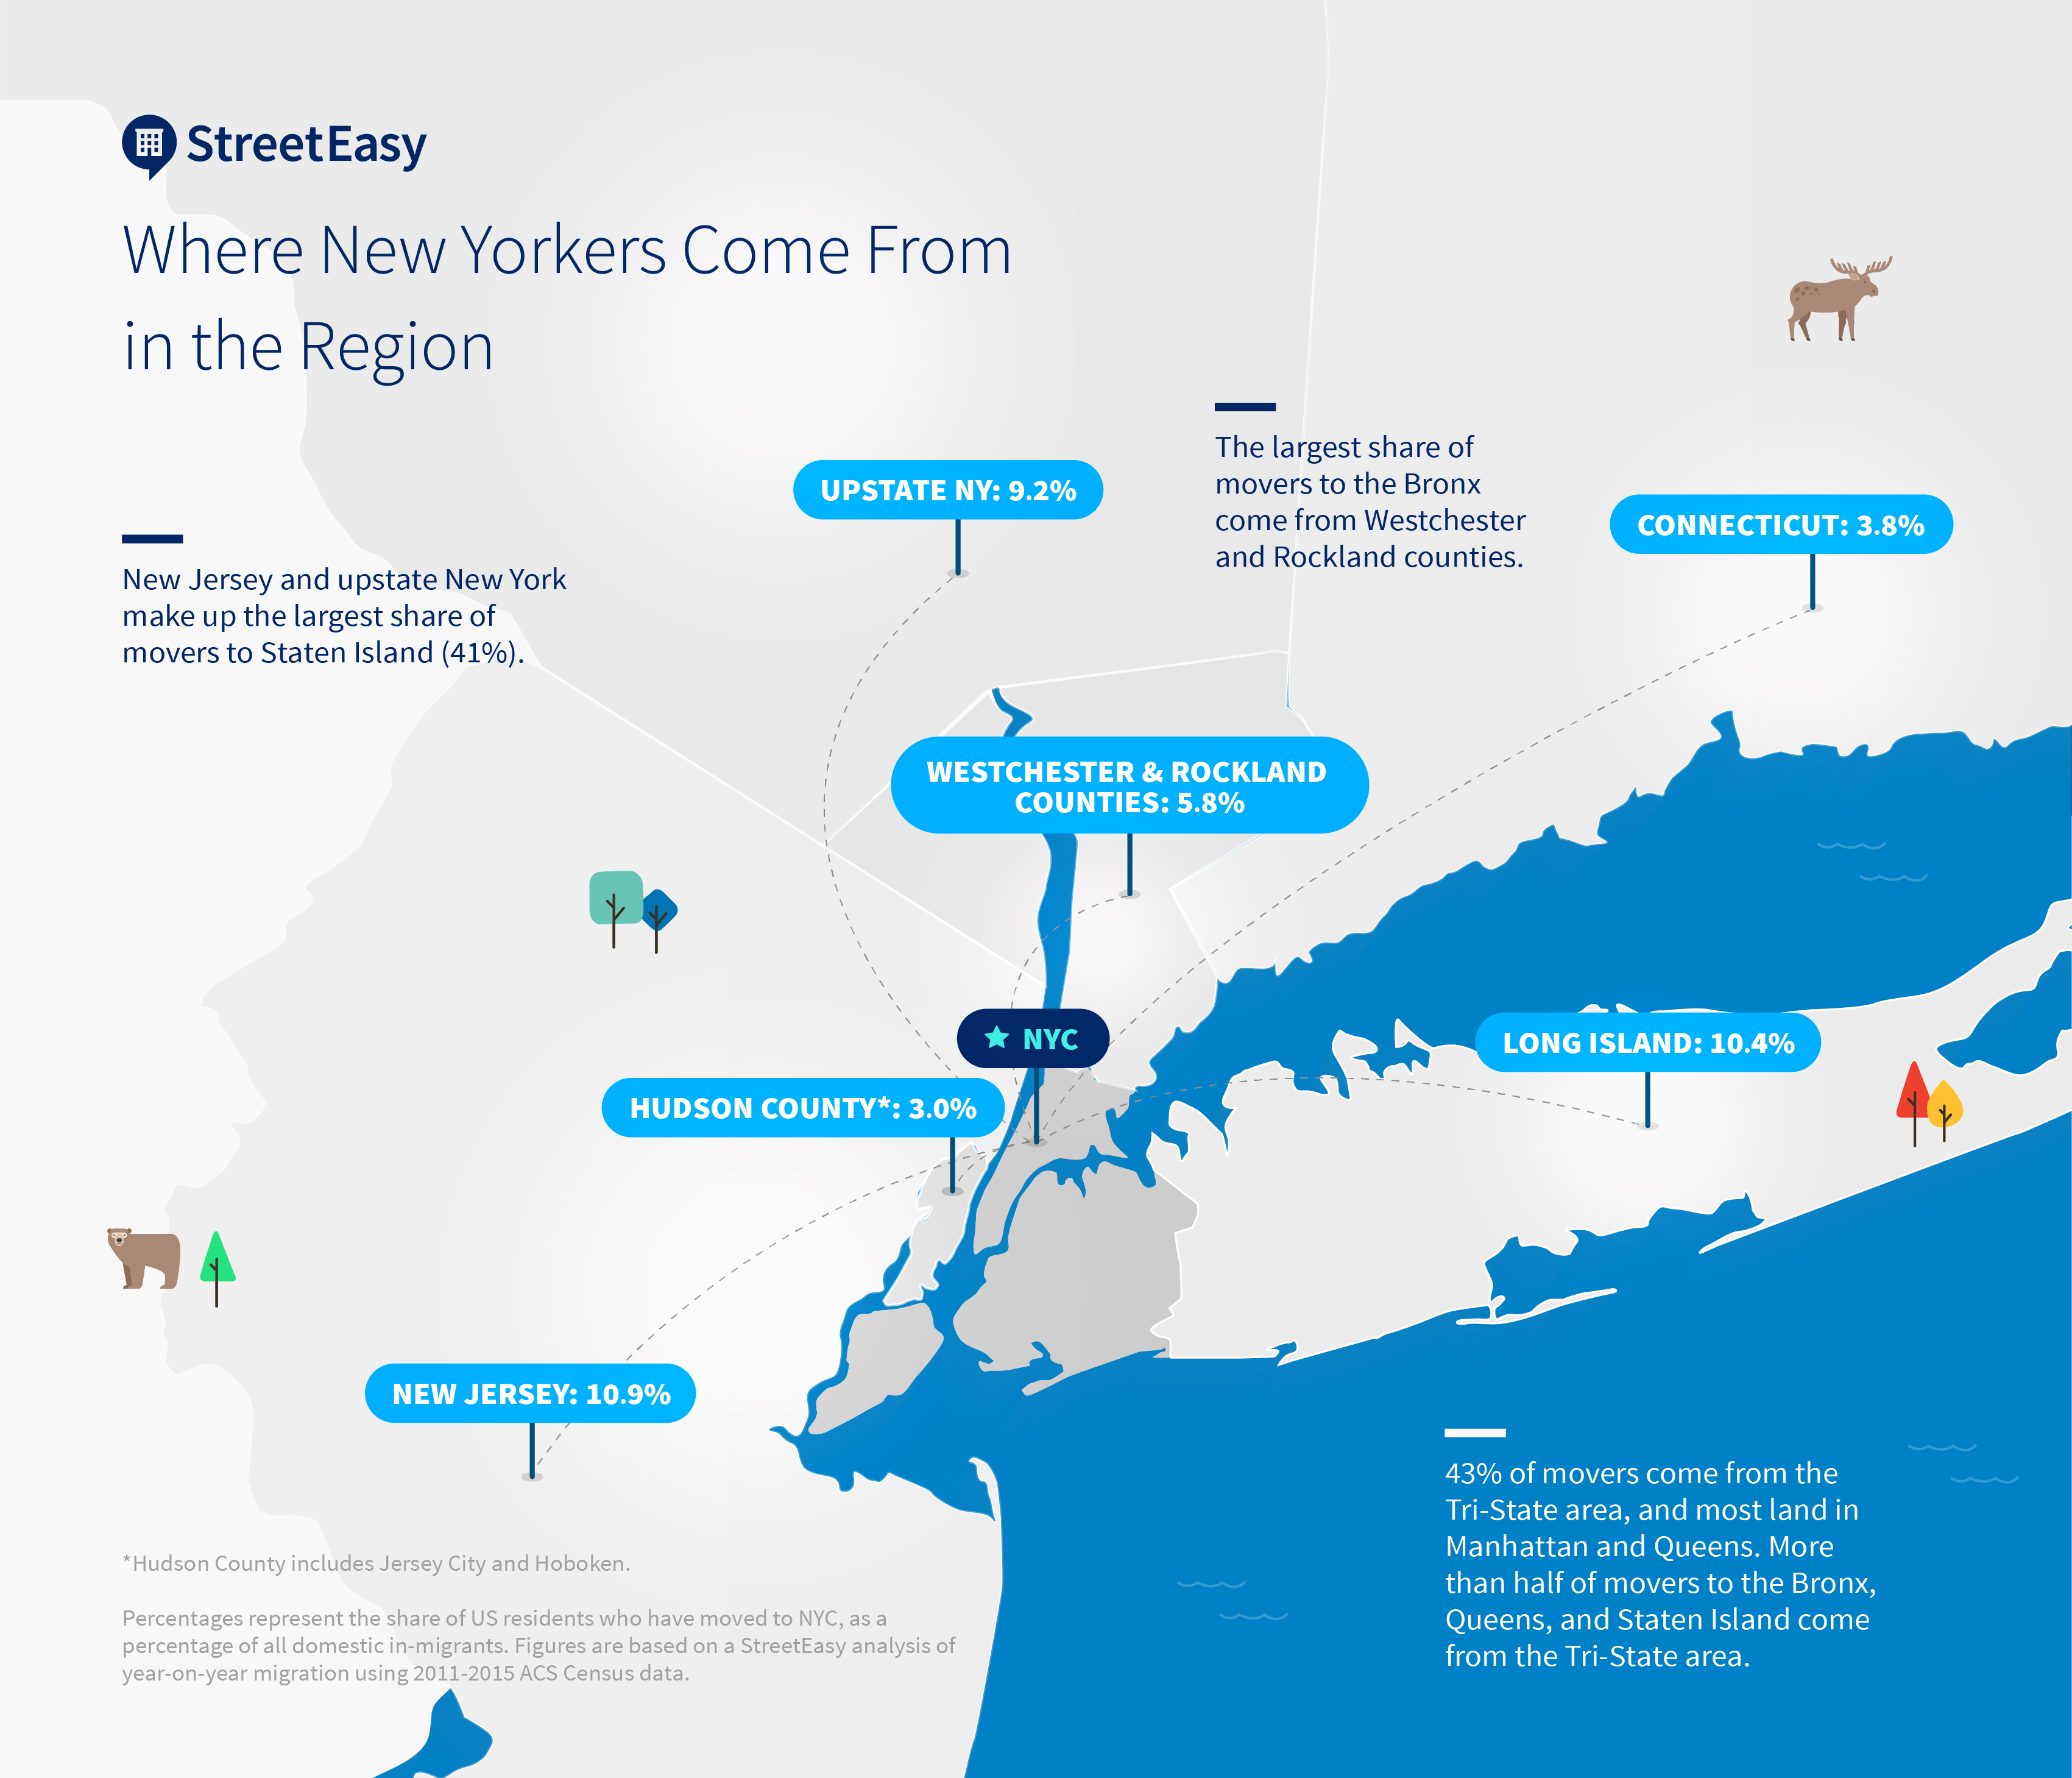 image of where new yorkers move from in the region